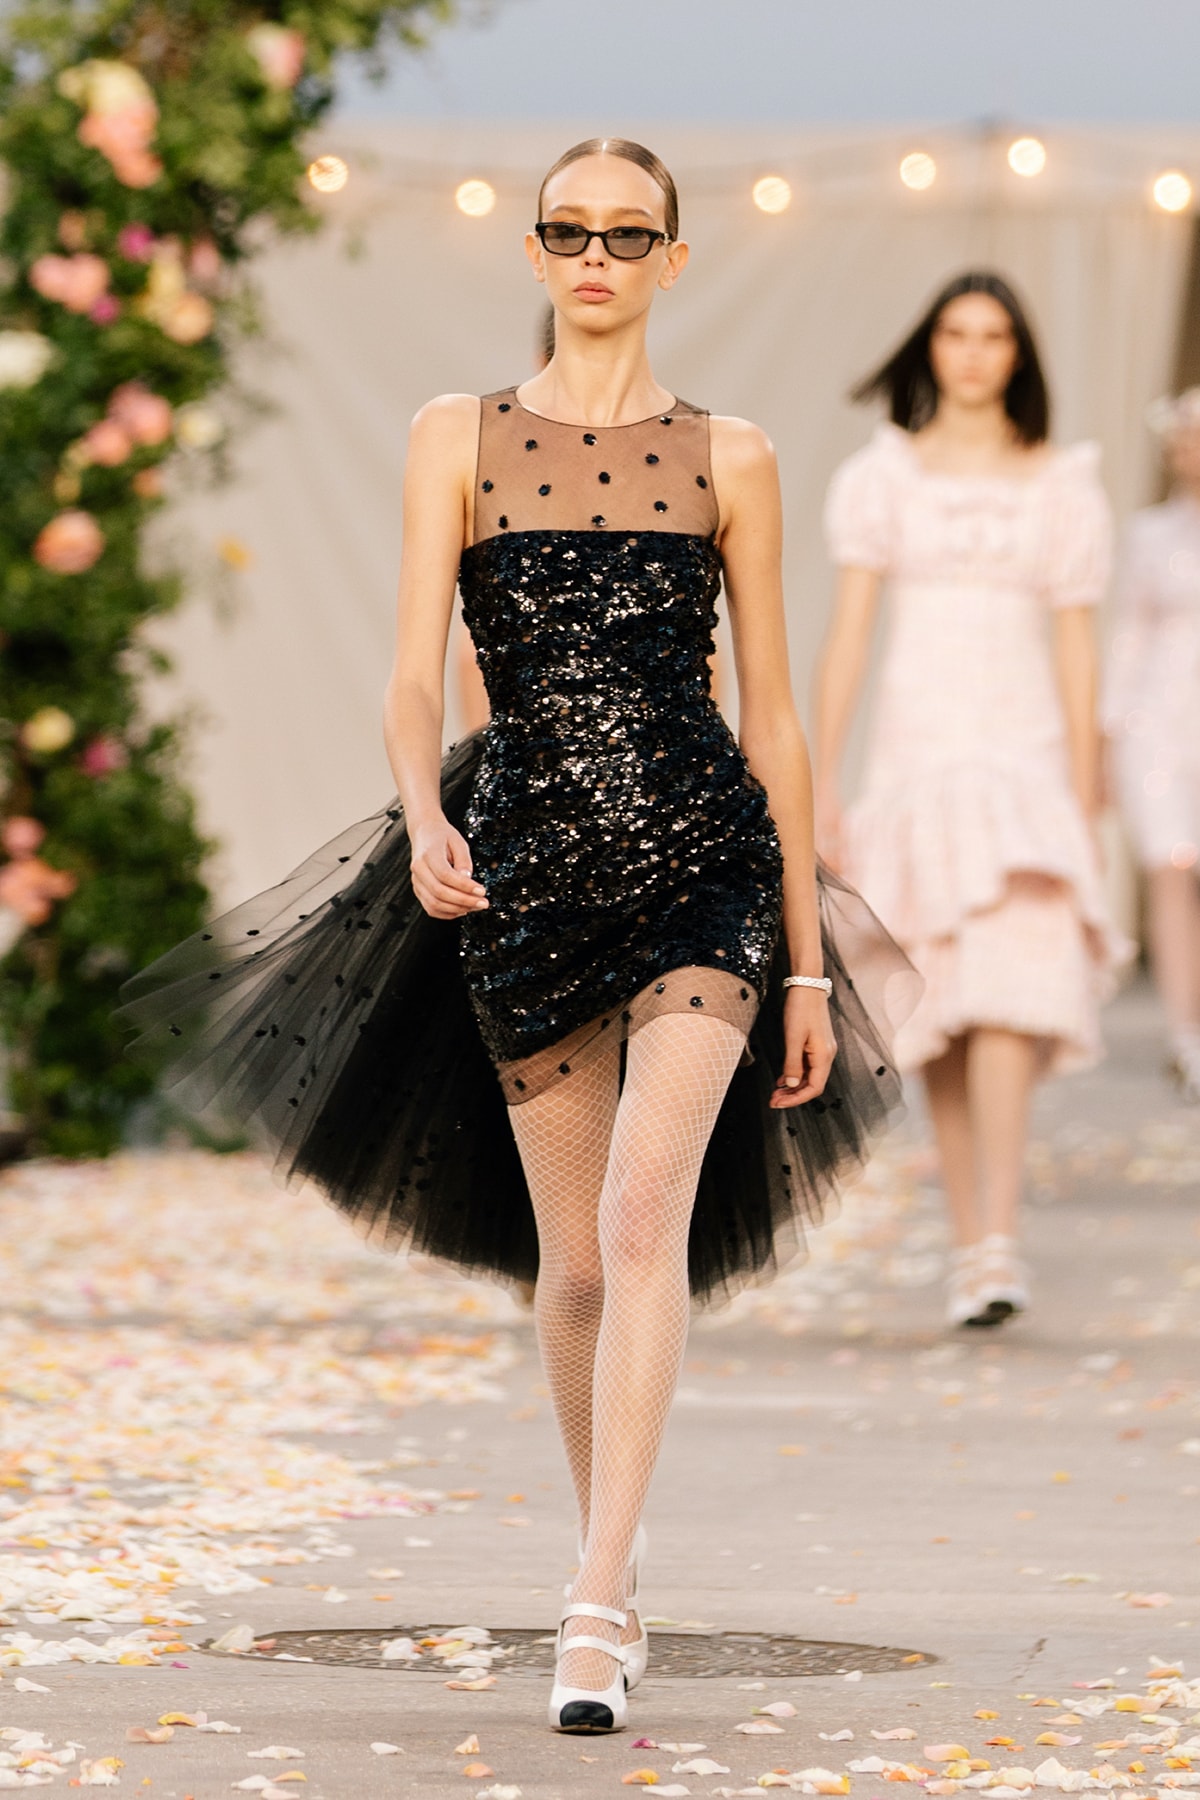 Chanel Spring Summer 2021 Haute Couture Show Collection